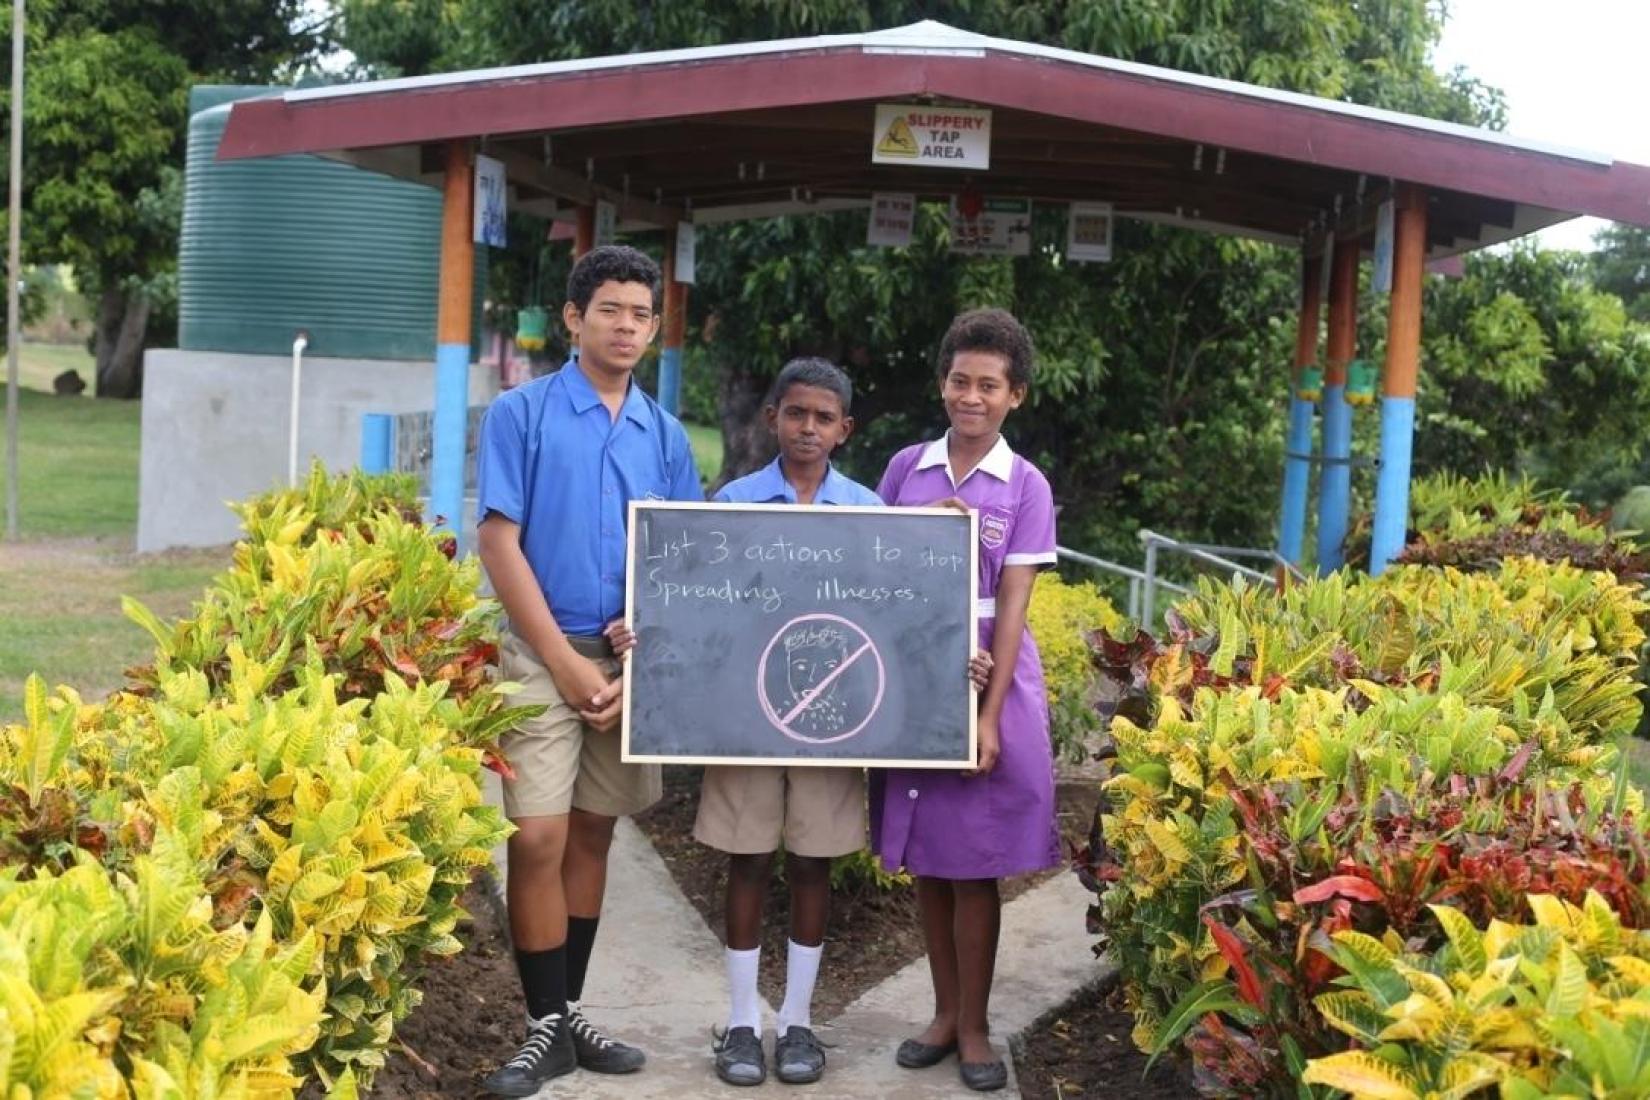 Natawa Primary School is a coeducational school located about three kilometres from Tavua town. There are seven teachers, 150 students as well as 23 kindergarten students.